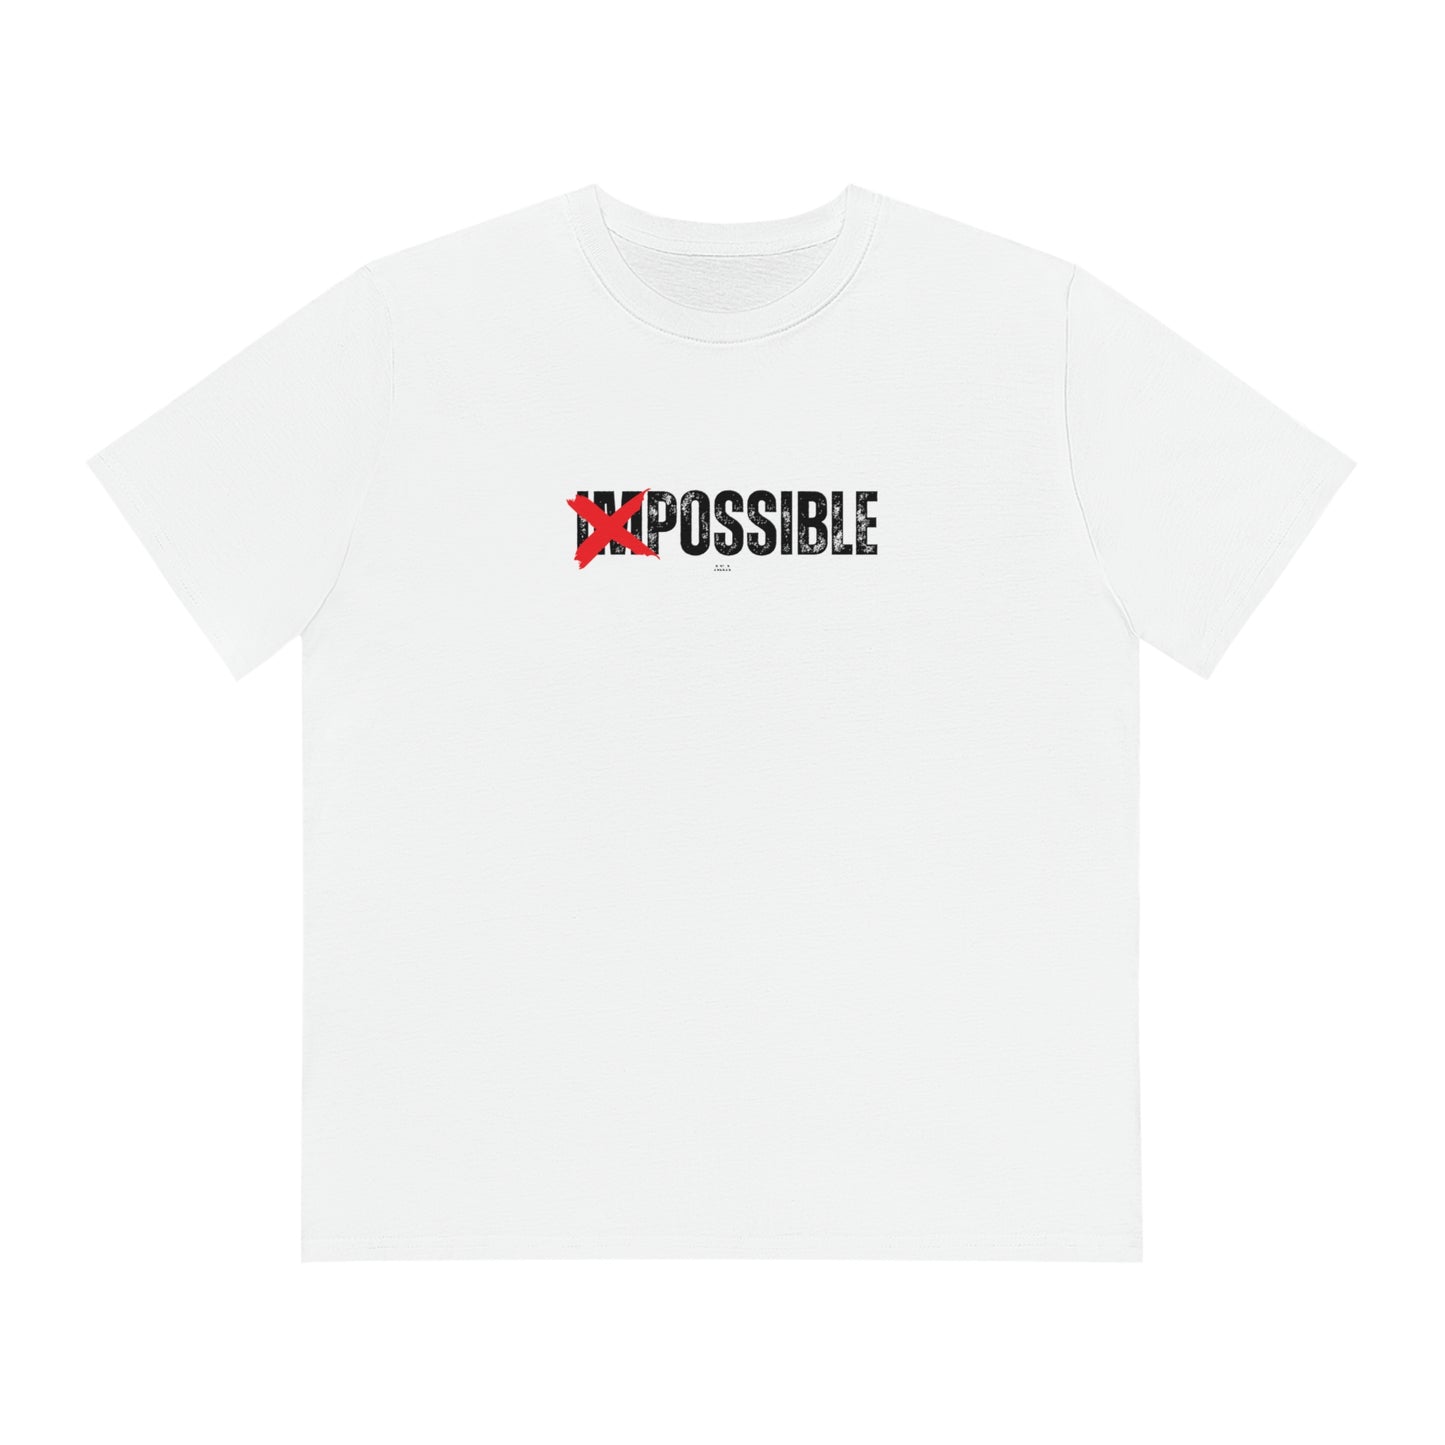 T-shirt - Impossible